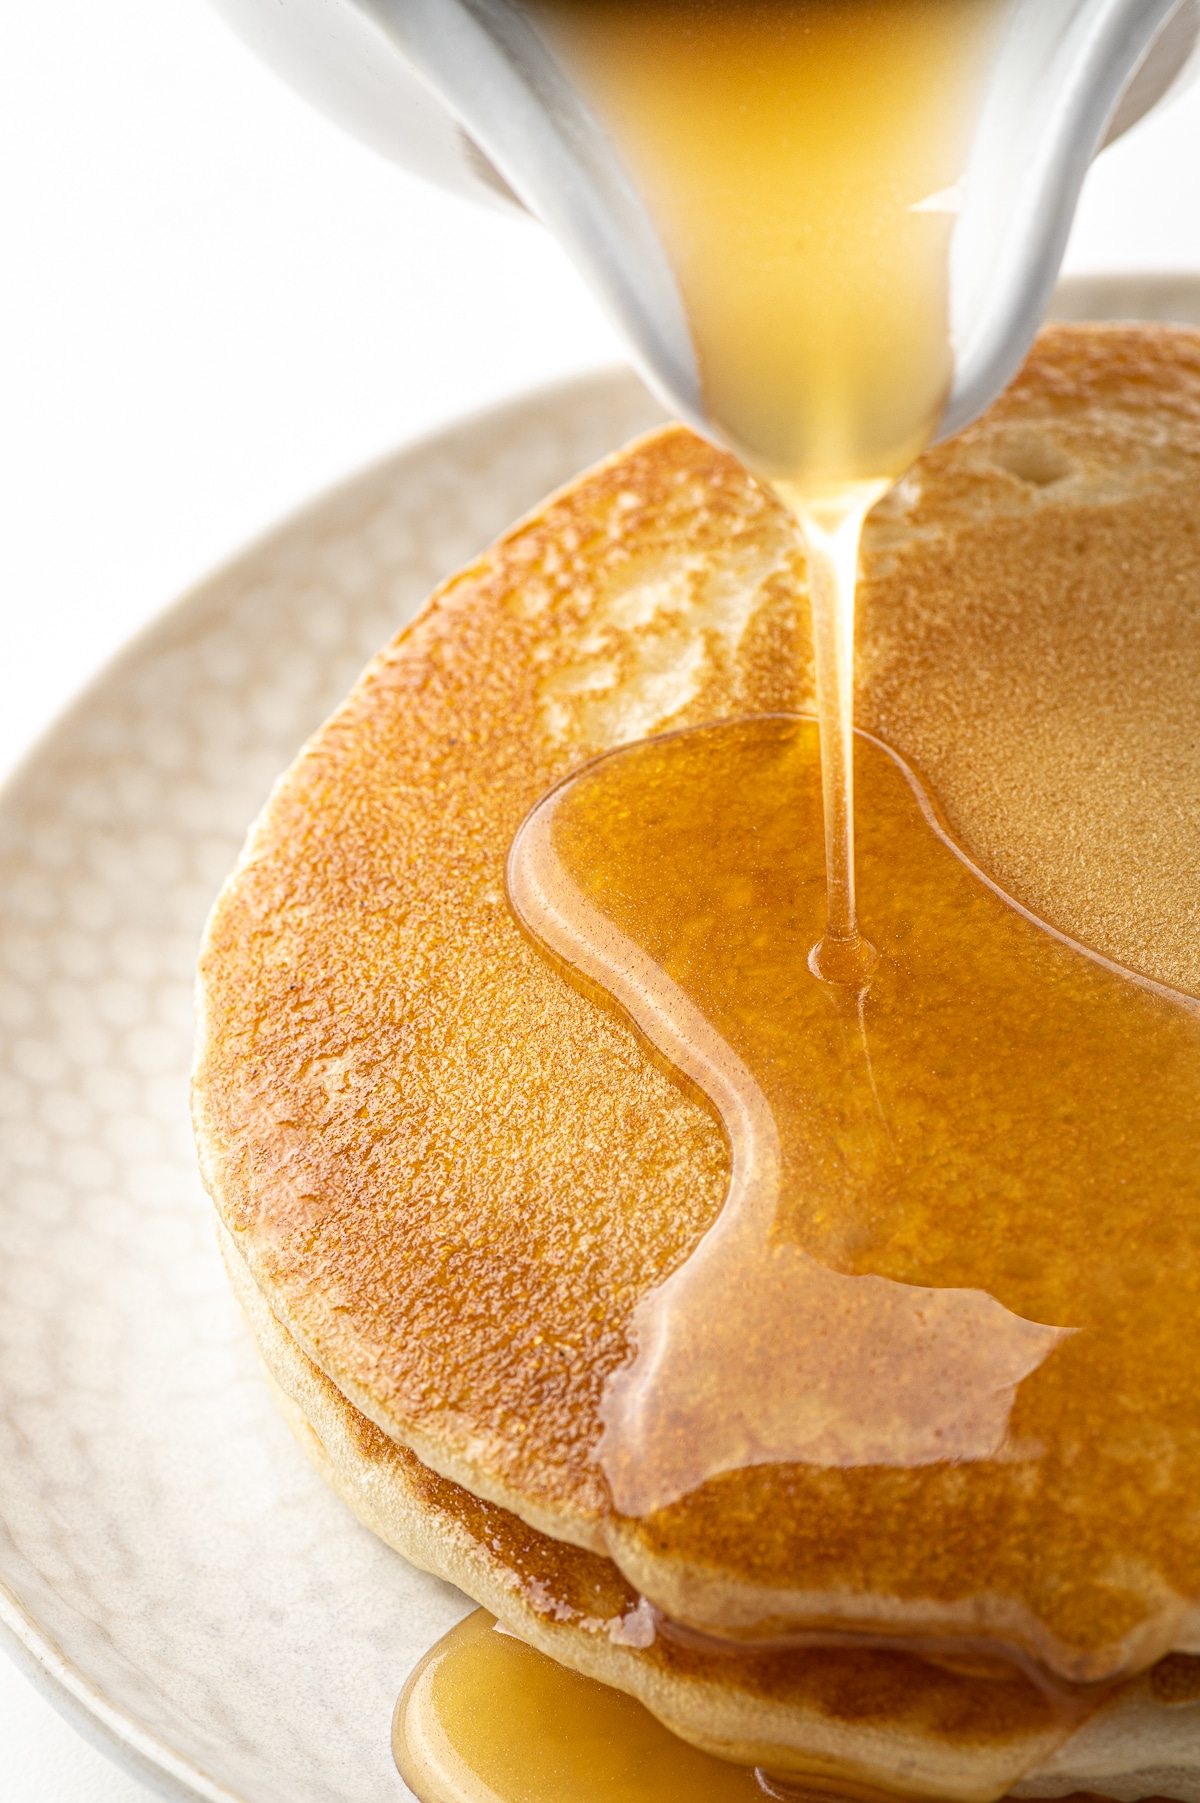 Pancakes being covered in syrup made from this keto maple syrup recipe.